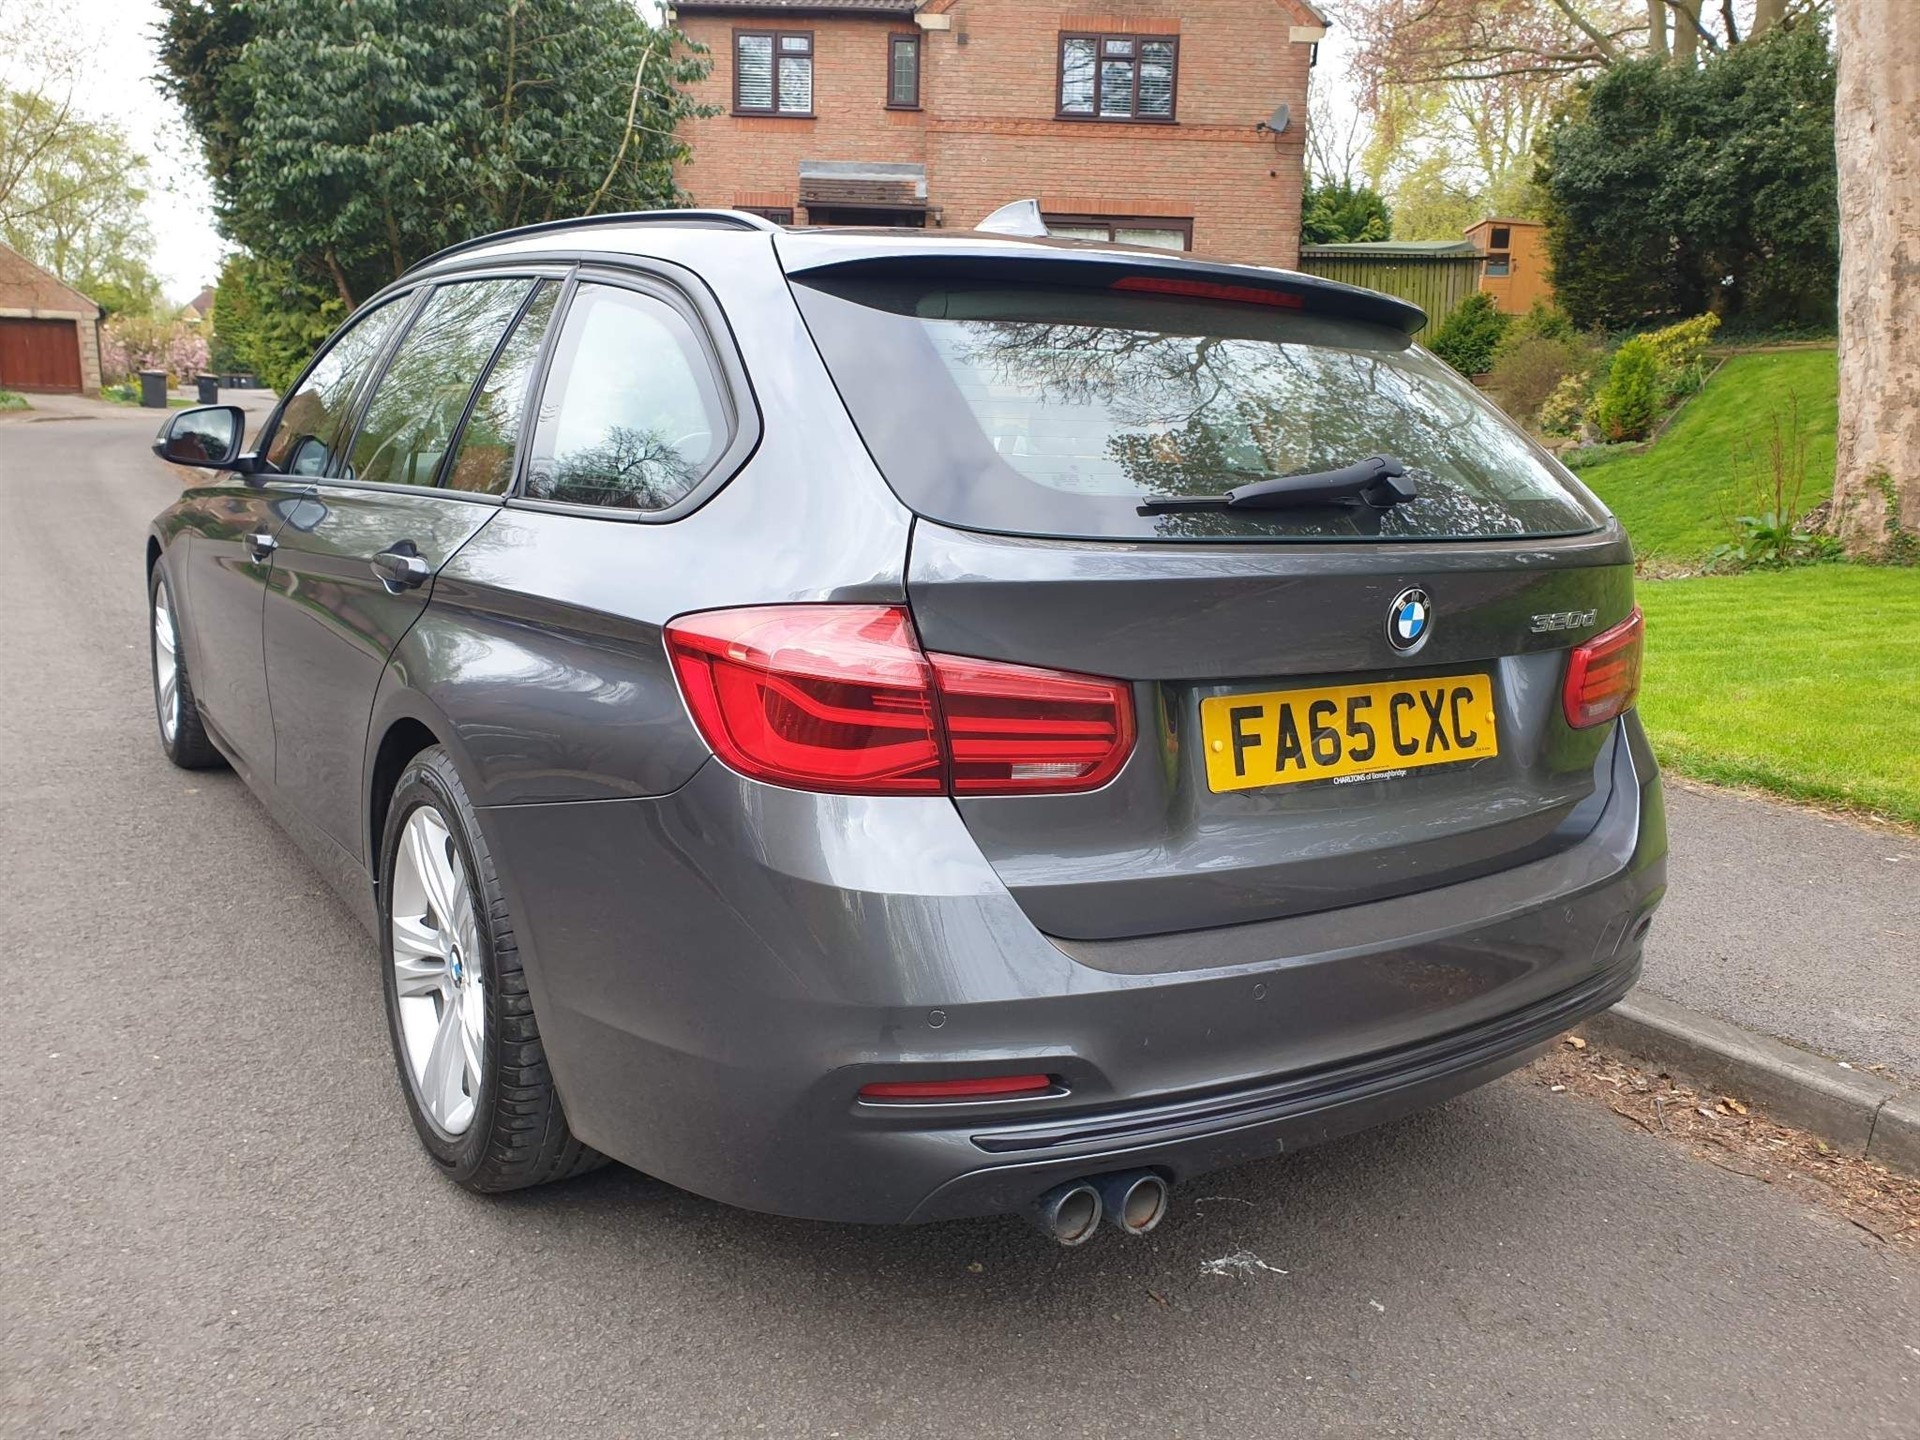 Used BMW 320d for sale in York, North Yorkshire